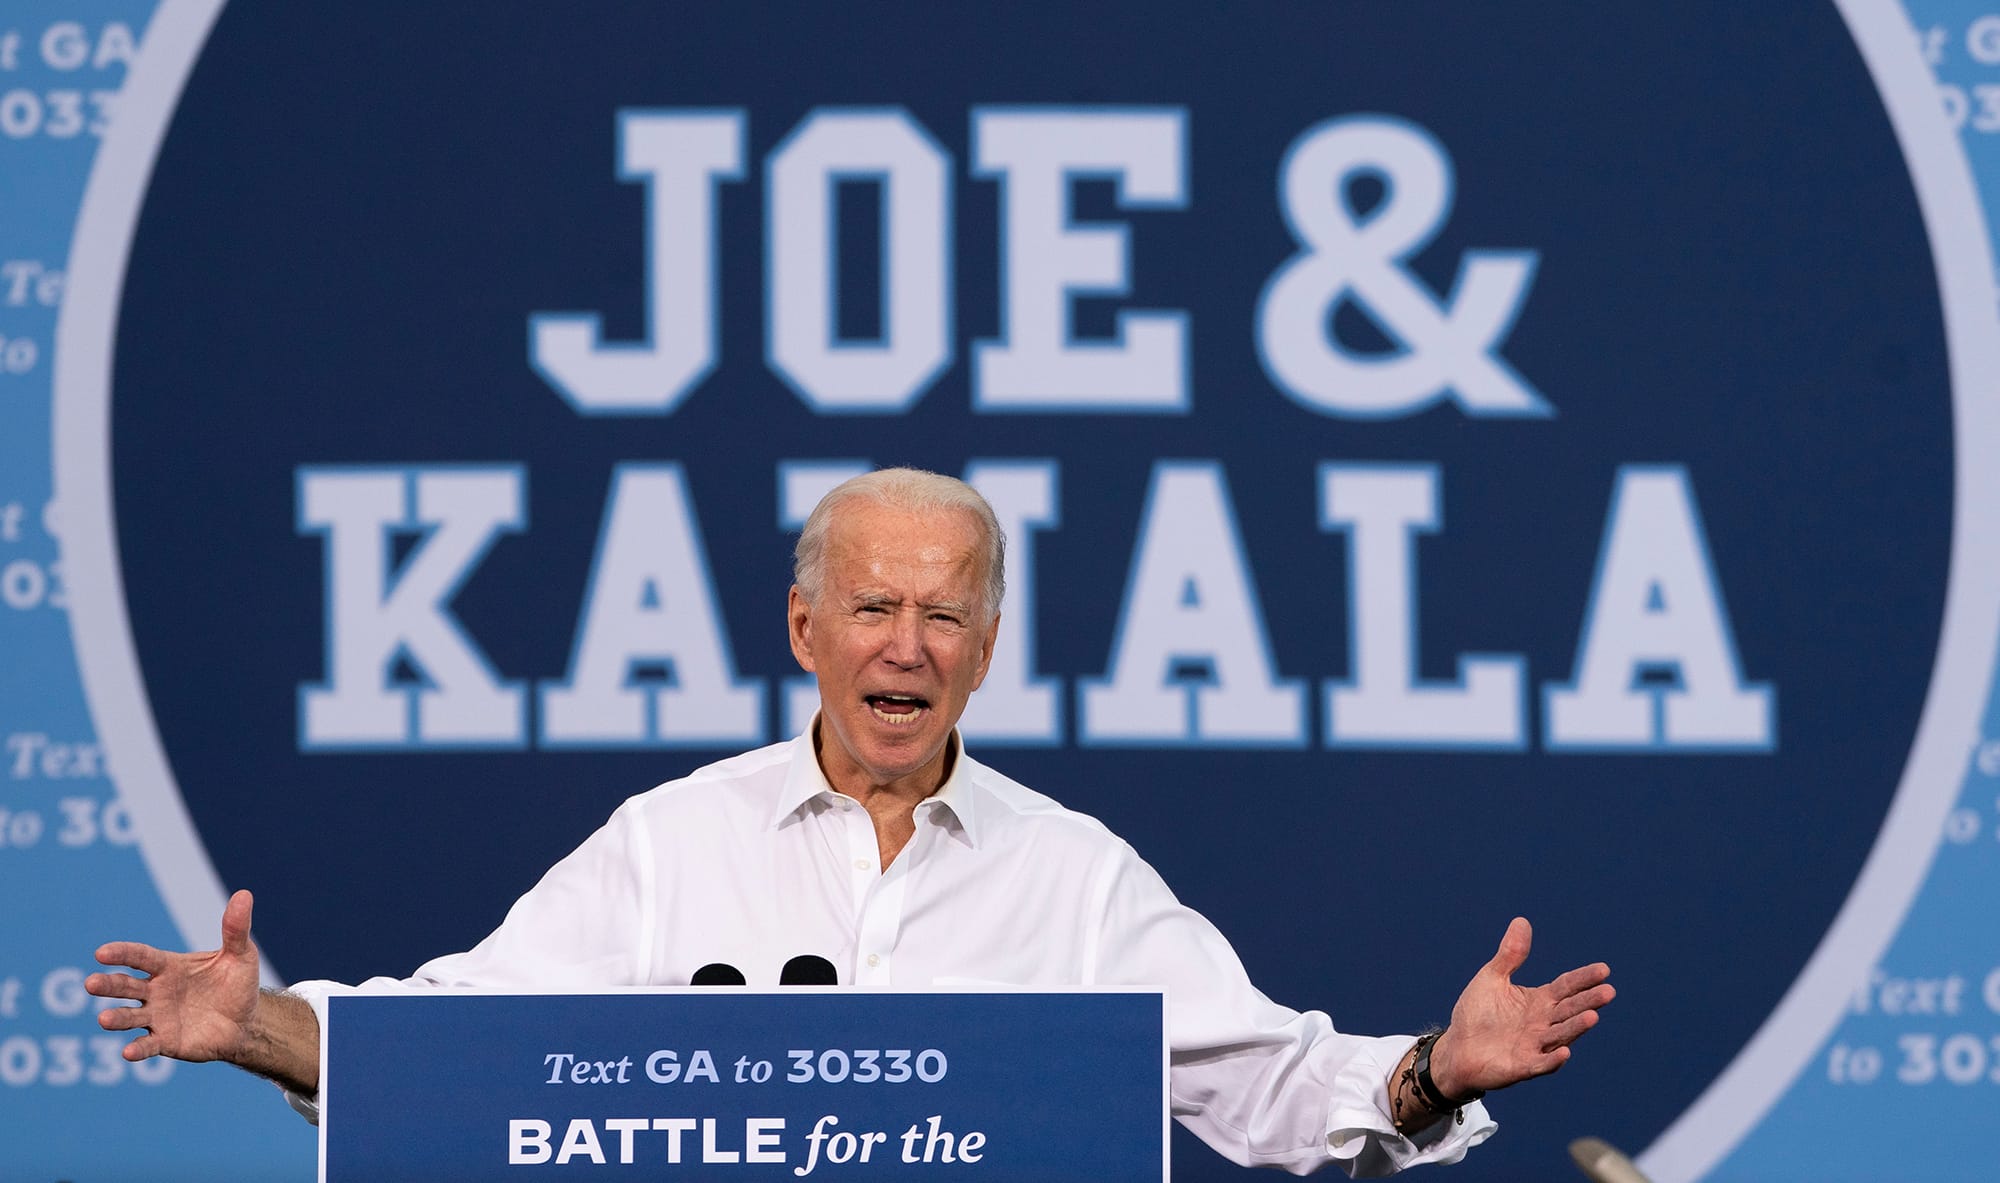 The source of the Biden campaign's 'Sun Belt' confidence Financial Nations